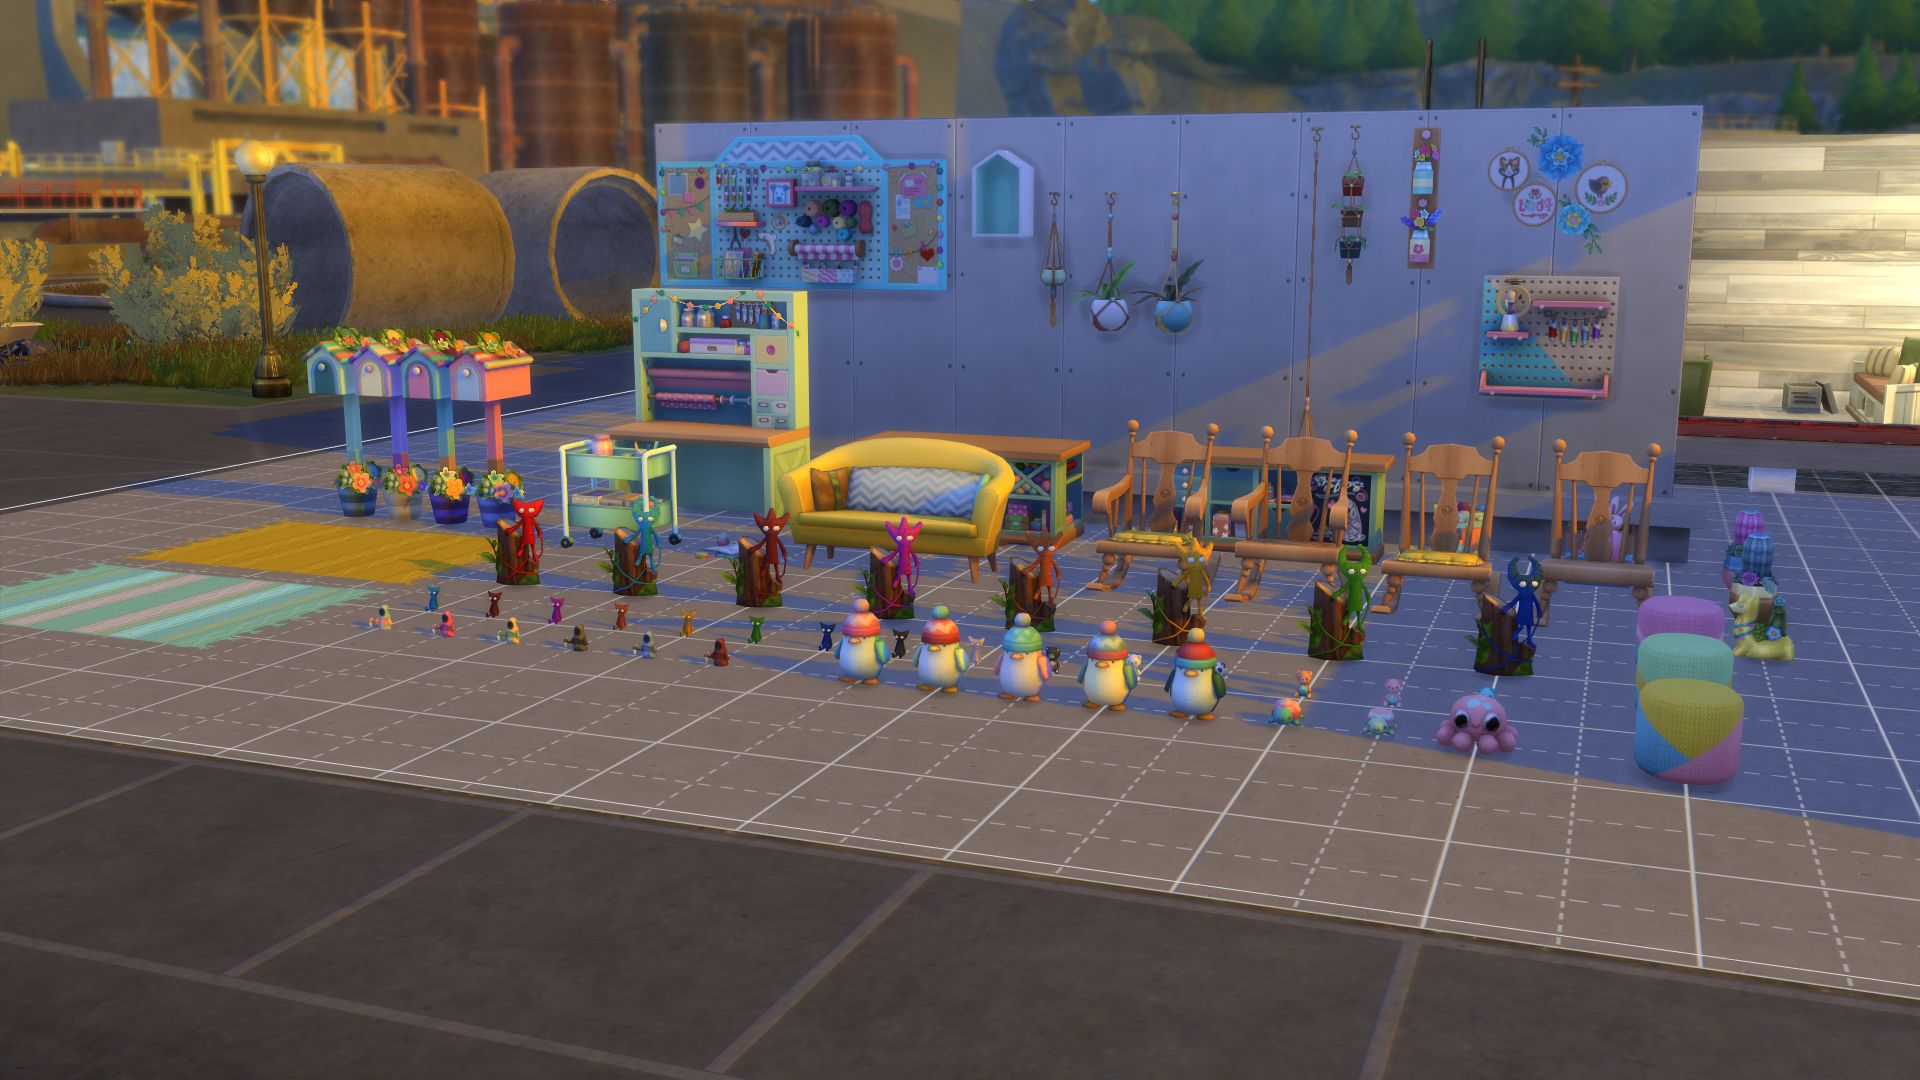 Sims 4 Nifty Knitting is out, and we went hands-on with the new